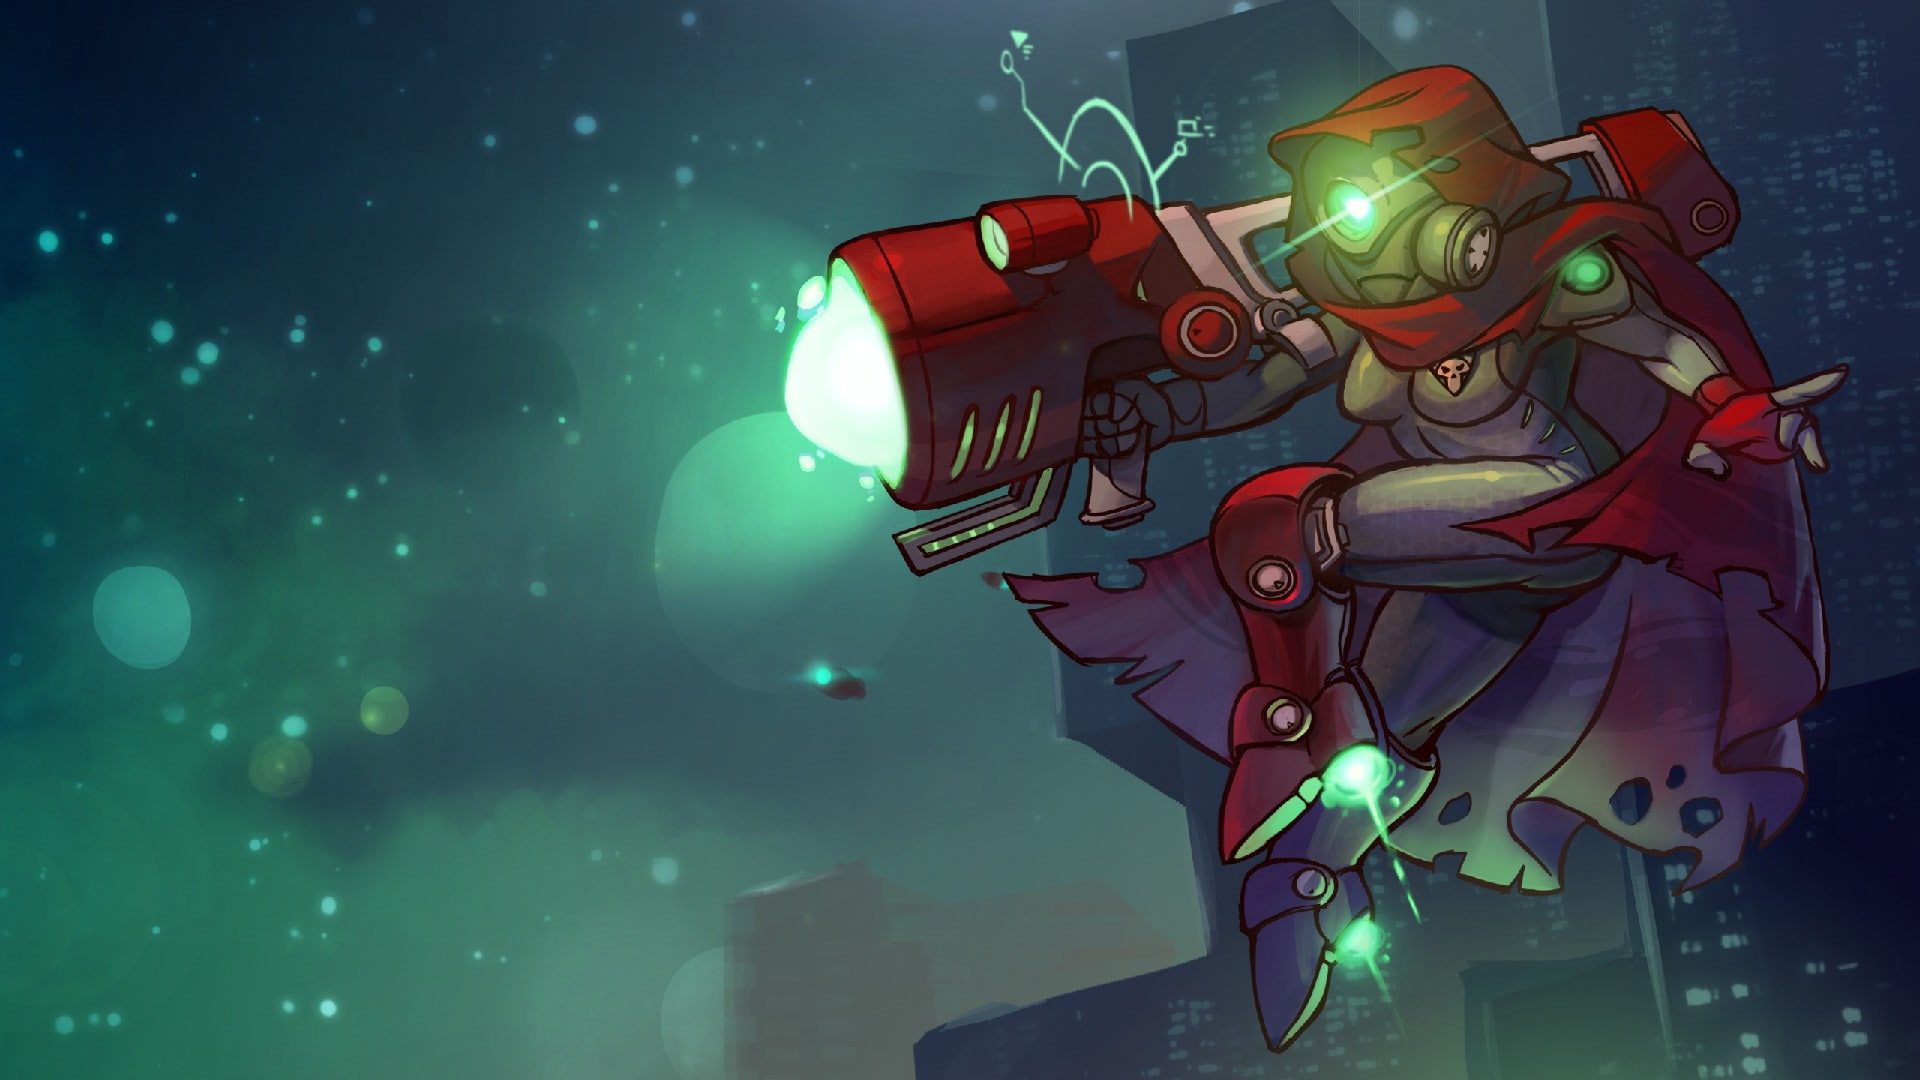 armor, artwork, awesomenauts, cannon, capes, eye, games, gas